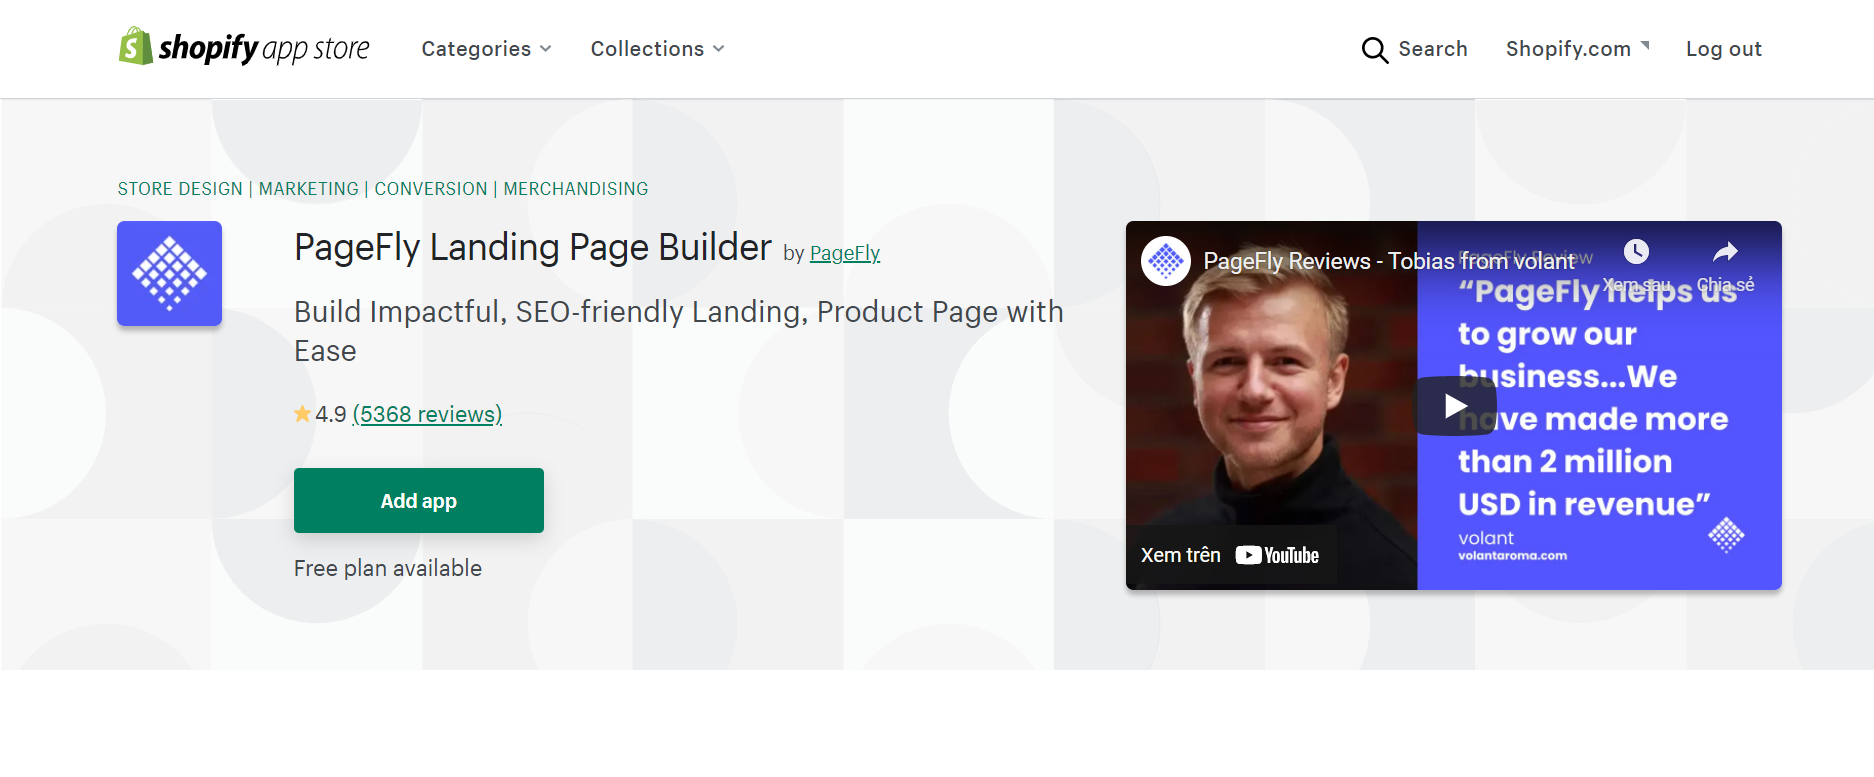 pagefly landing page builder